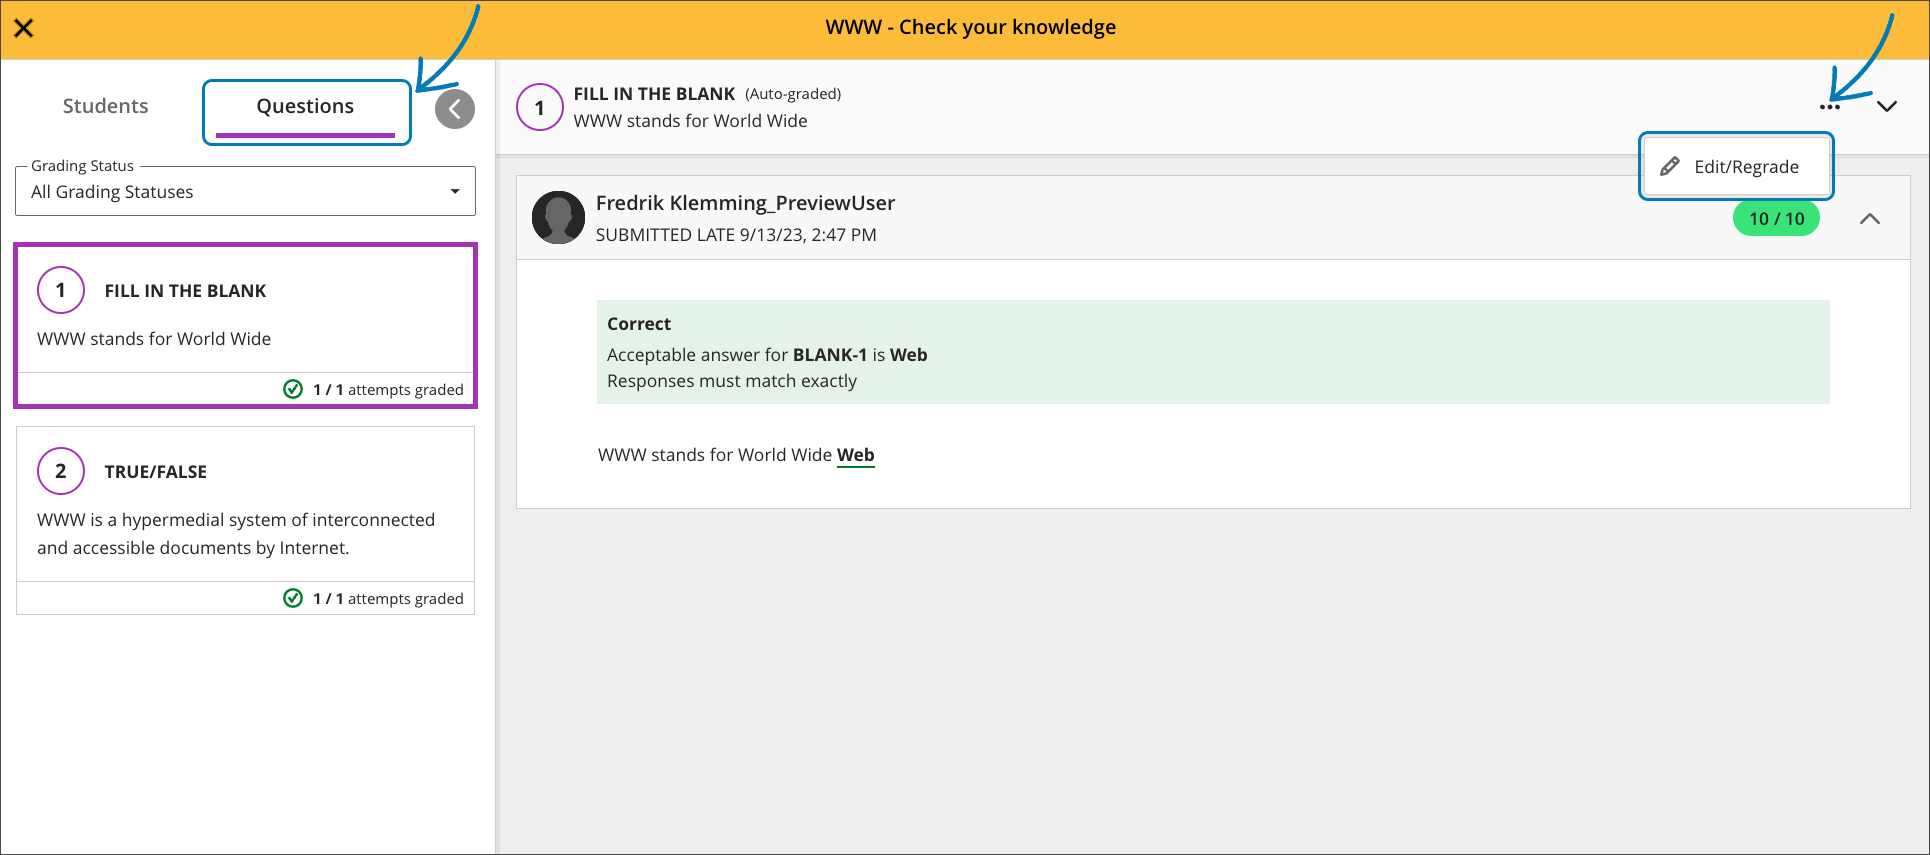 Instructor view - Edit/Regrade option when grading a test by question